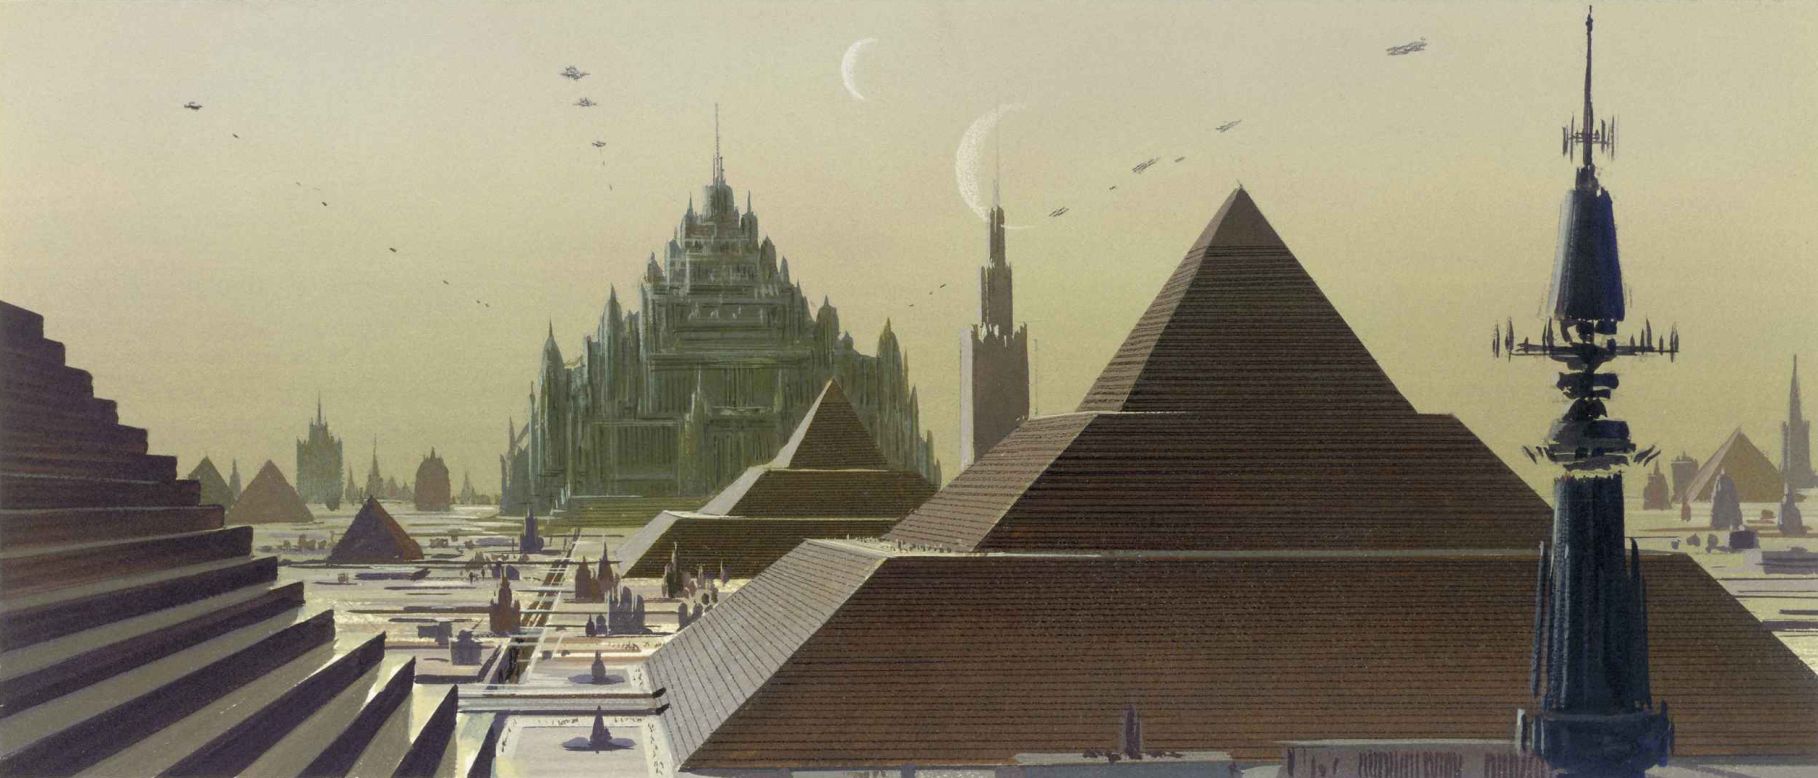 Star Wars' architecture: the Earth buildings and places that inspired  George Lucas